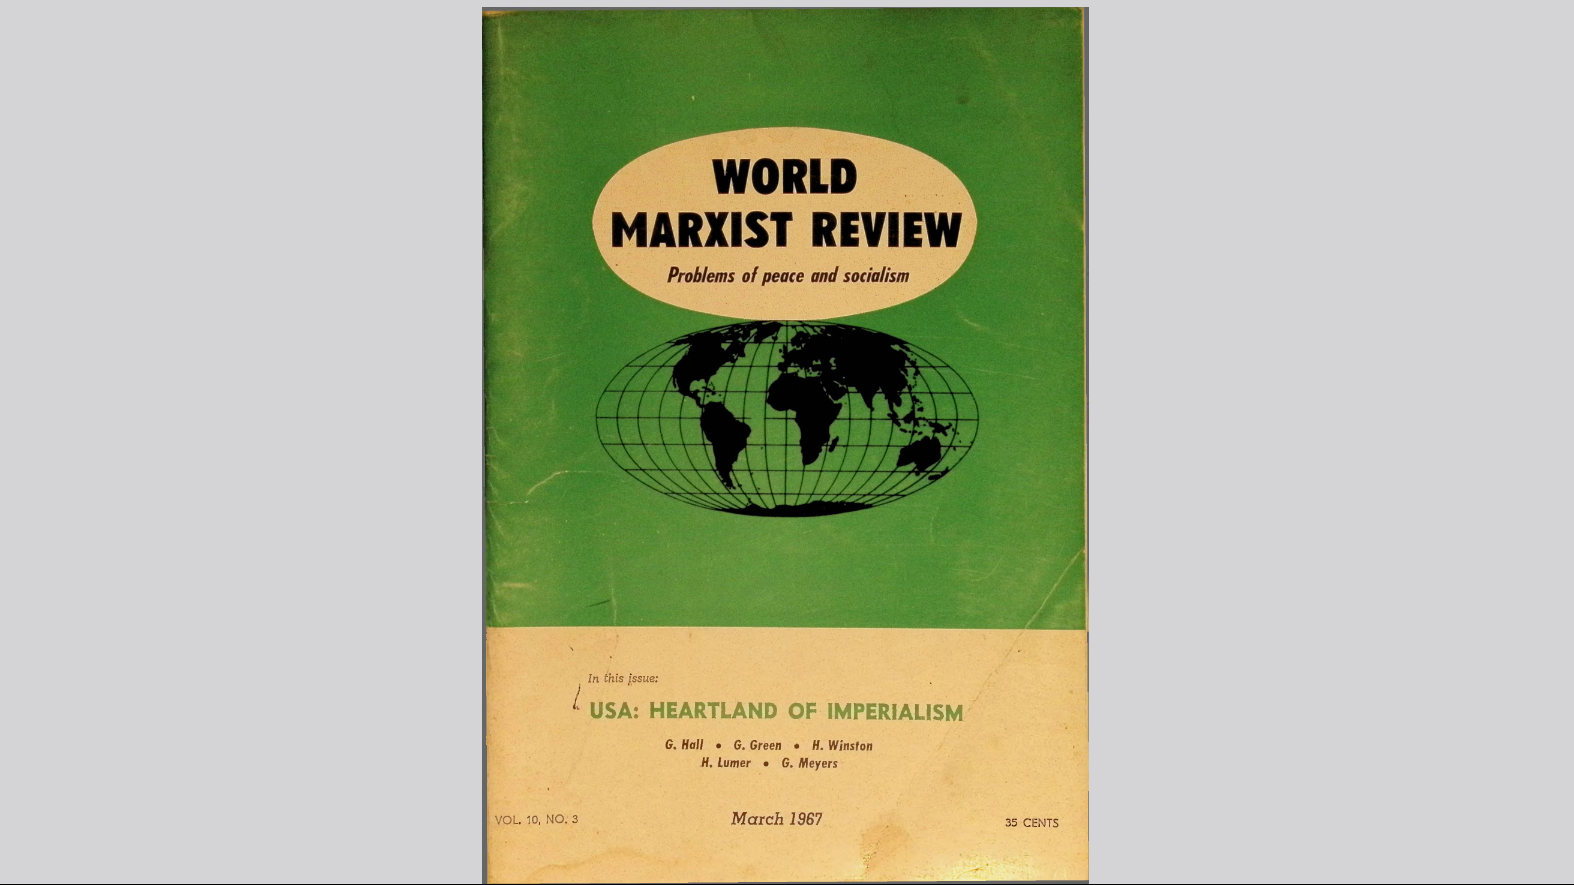 World Marxist Review Archive Now Available on the PCUSA Website The